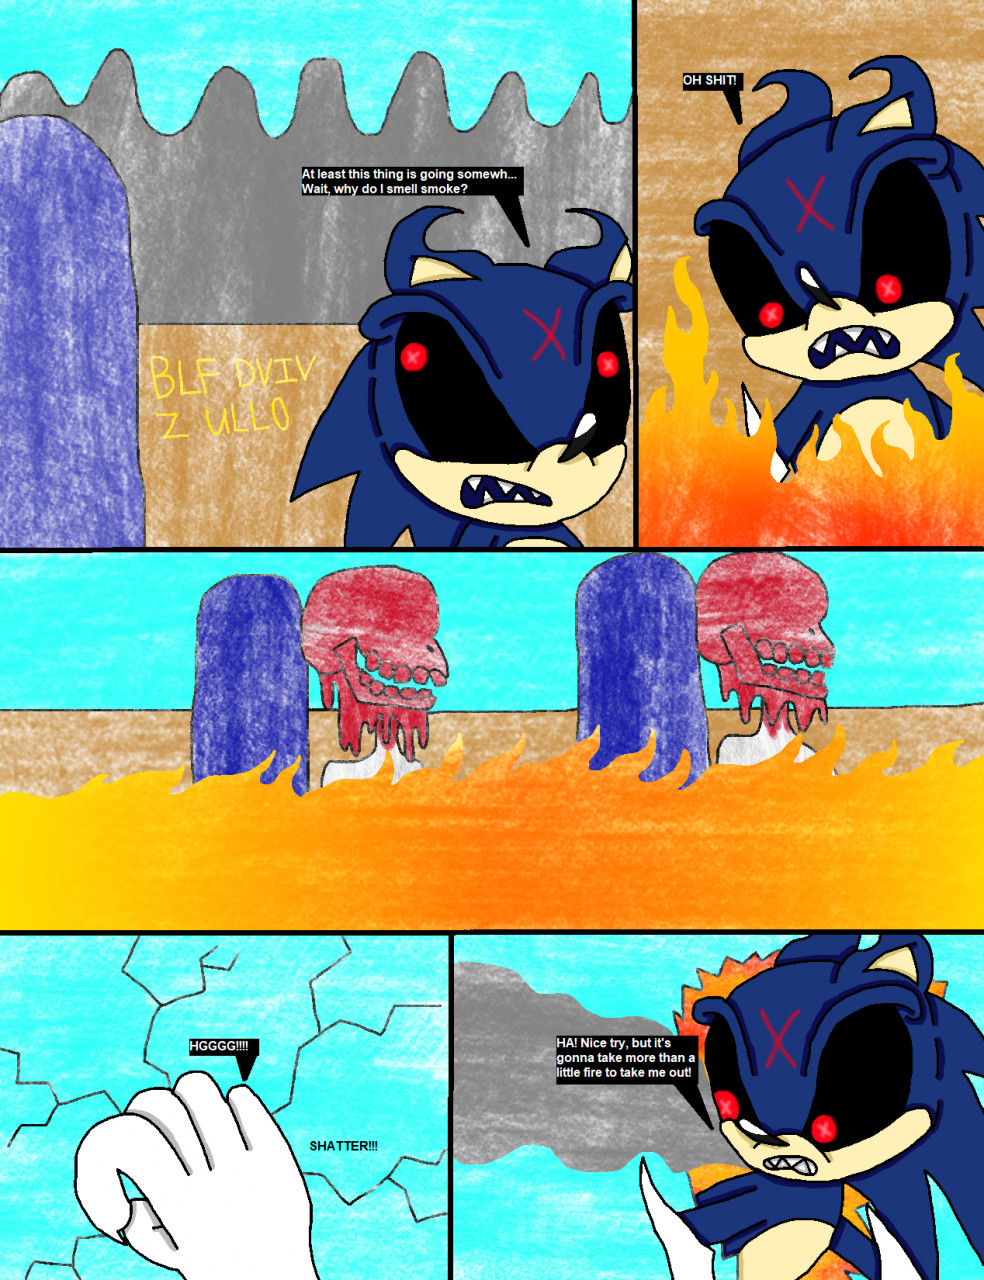 sonic.exe in the dark by Witchdragon999 -- Fur Affinity [dot] net